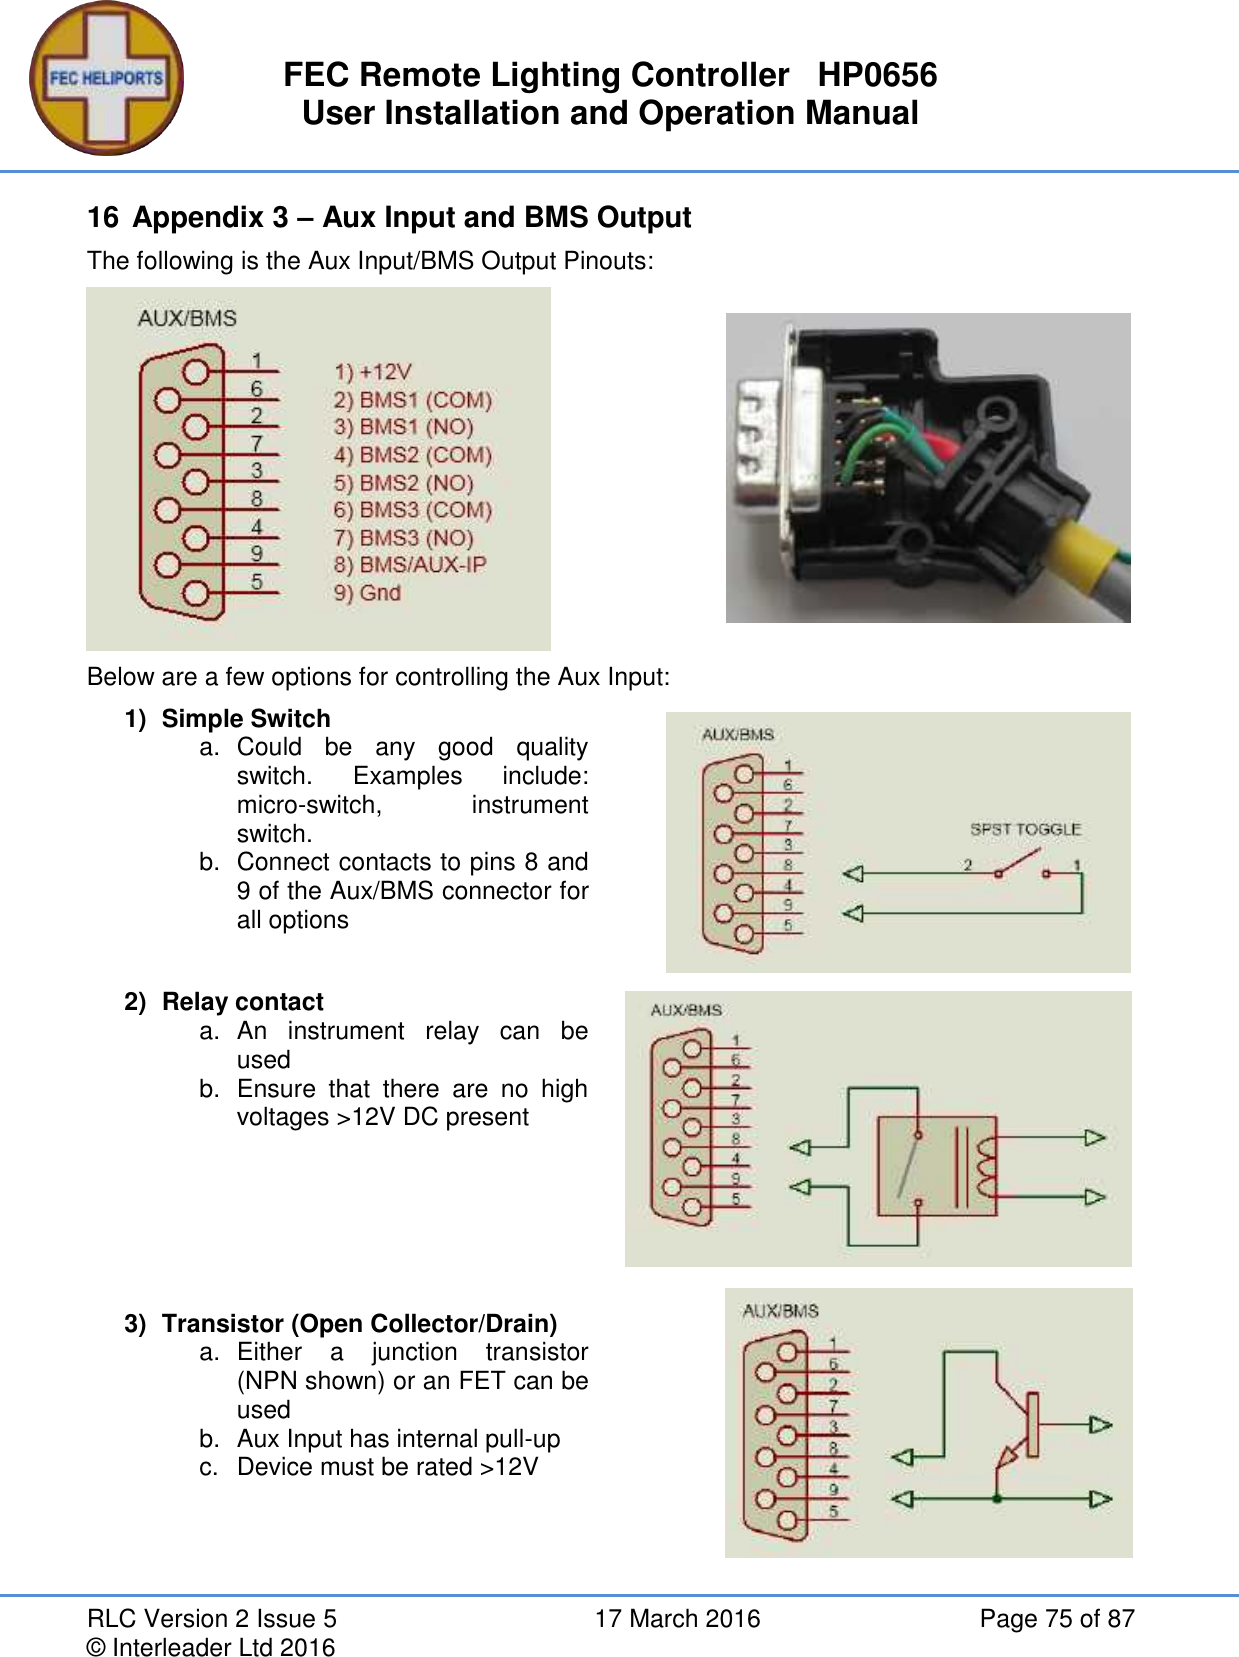 FEC Remote Lighting Controller   HP0656 User Installation and Operation Manual RLC Version 2 Issue 5  17 March 2016  Page 75 of 87 © Interleader Ltd 2016 16 Appendix 3 – Aux Input and BMS Output The following is the Aux Input/BMS Output Pinouts:  Below are a few options for controlling the Aux Input: 1)  Simple Switch a.  Could  be  any  good  quality switch.  Examples  include: micro-switch,  instrument switch. b.  Connect contacts to pins 8 and 9 of the Aux/BMS connector for all options  2)  Relay contact a.  An  instrument  relay  can  be used b.  Ensure  that  there  are  no  high voltages &gt;12V DC present     3)  Transistor (Open Collector/Drain) a.  Either  a  junction  transistor (NPN shown) or an FET can be used b.  Aux Input has internal pull-up c.  Device must be rated &gt;12V    